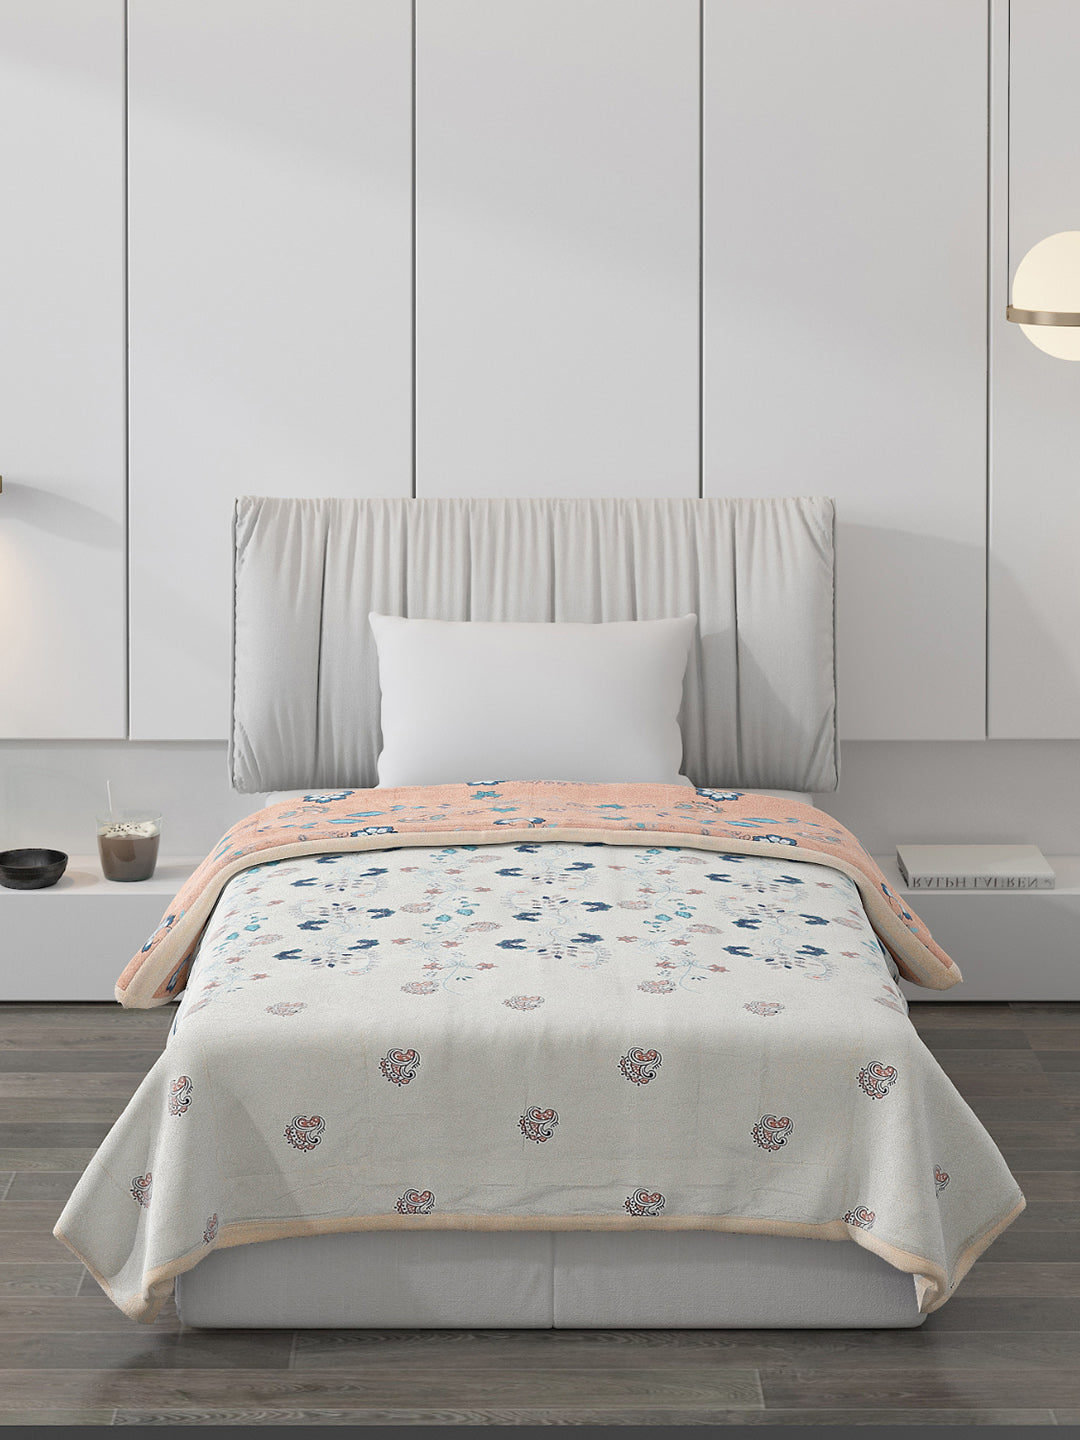 Printed Polyester Single Bed Comforter for AC Room